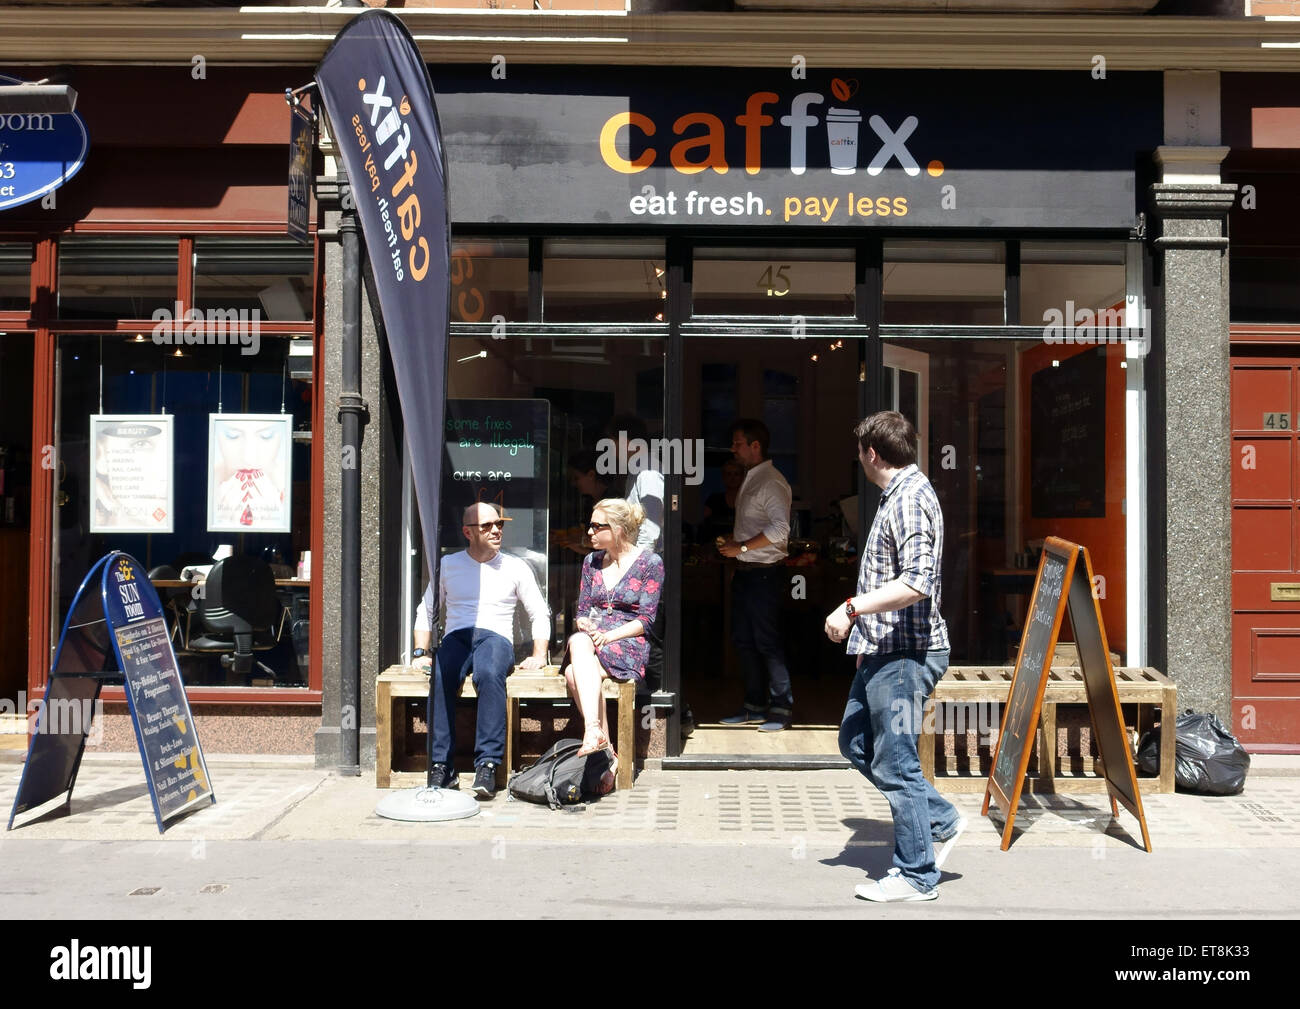 Caffix £1 for all food and drink cafe, Fitzrovia, London Stock Photo